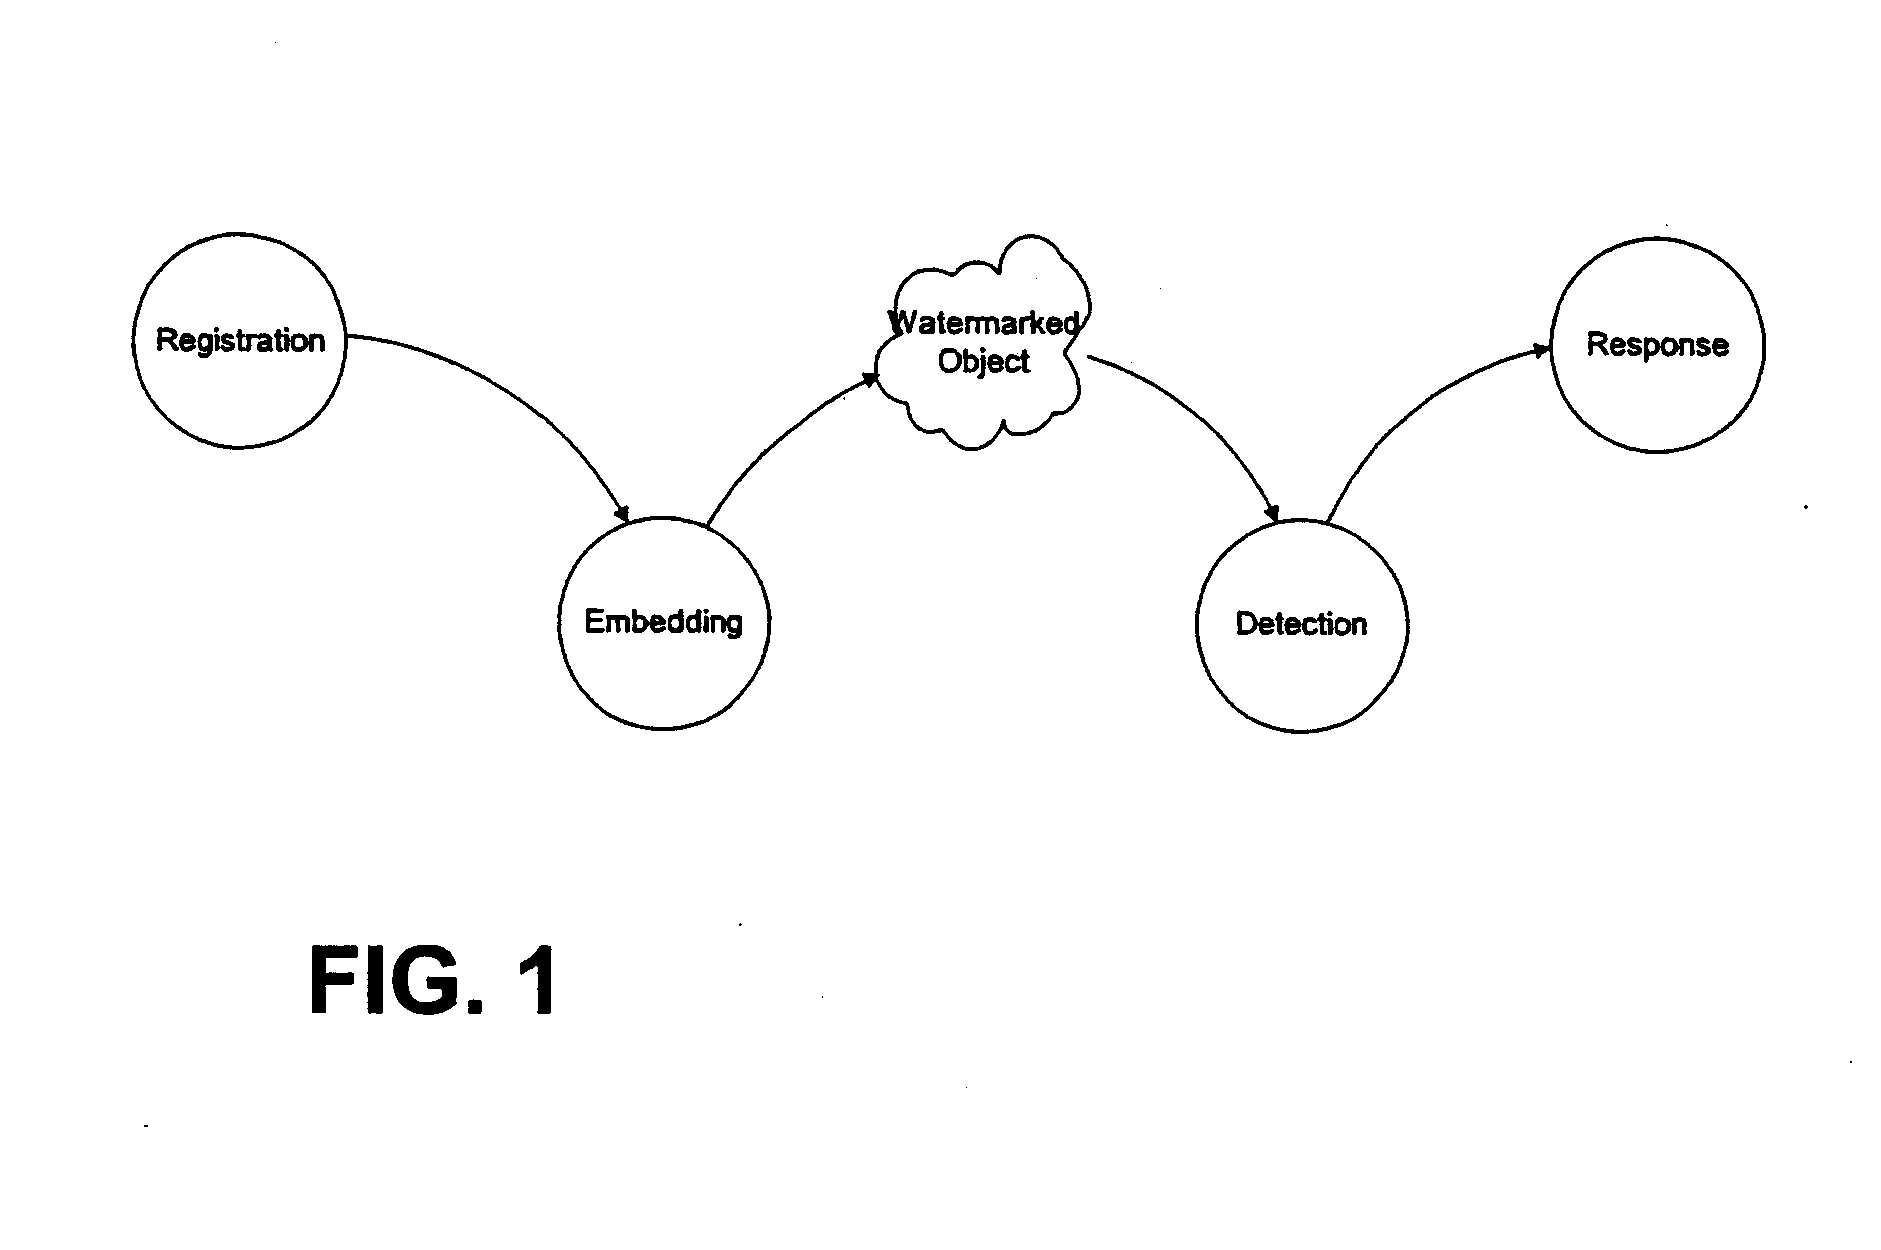 Methods and devices employing optical sensors and/or steganography